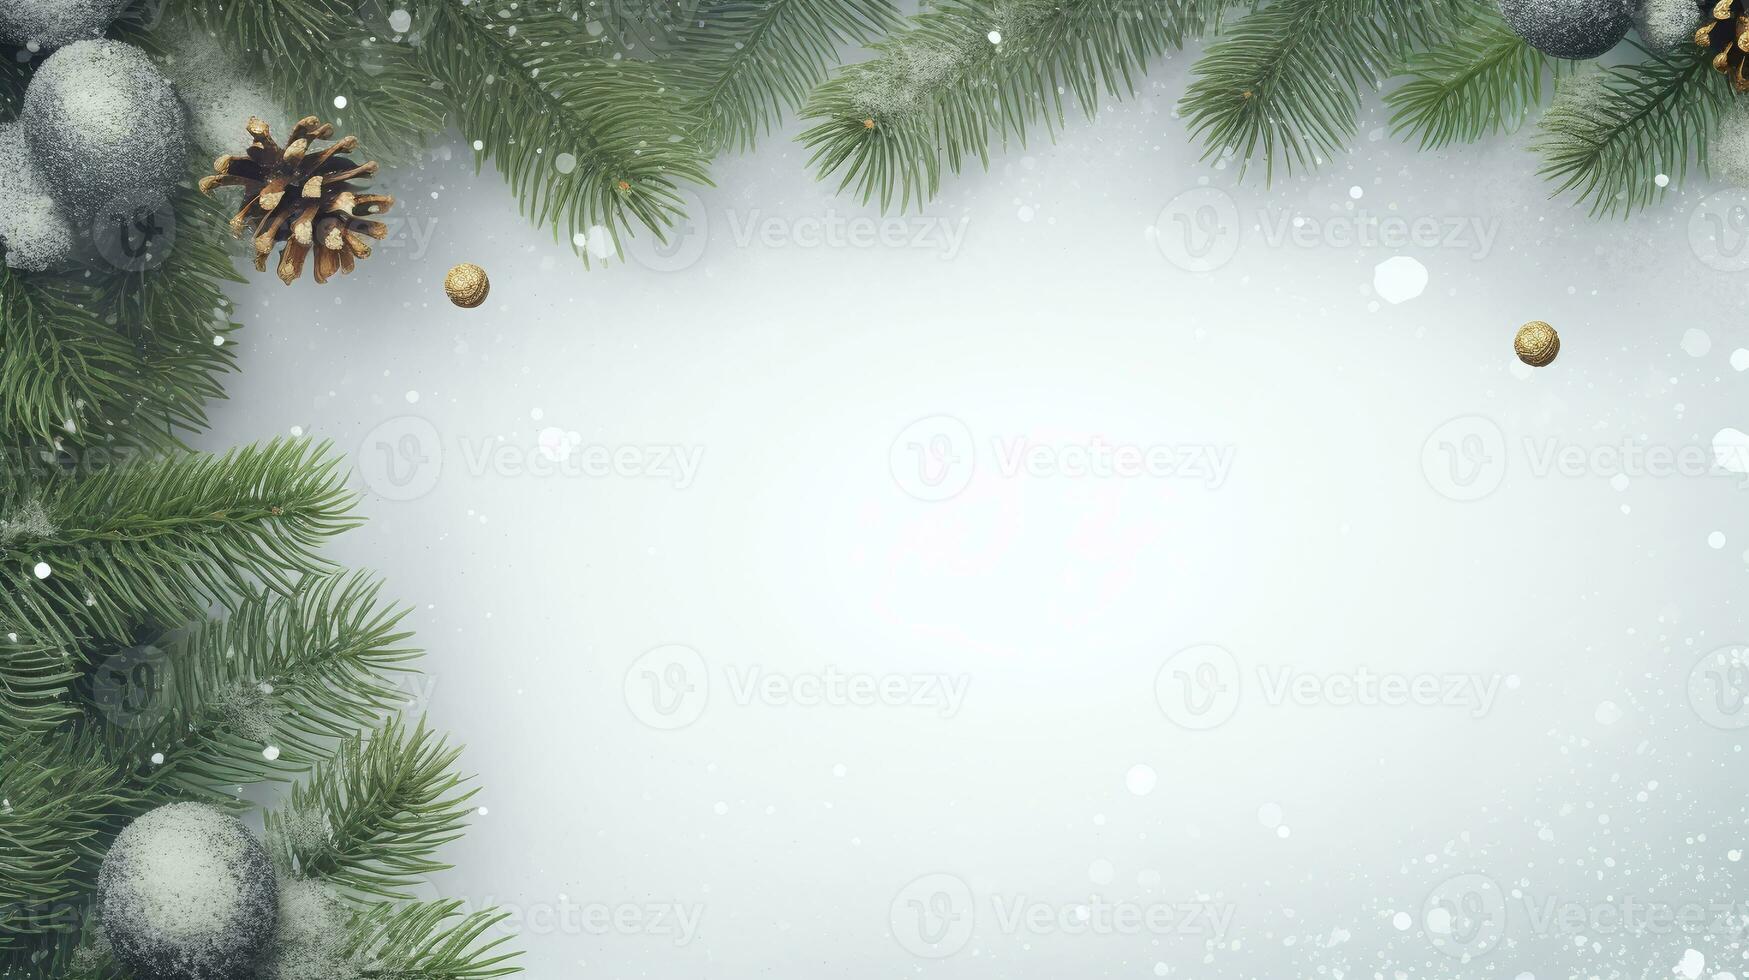 Festive Christmas frame made of fir branches, gift boxes, red decorations, sparkles, and confetti on white background. Perfect for holiday greeting cards, website design, and social media photo